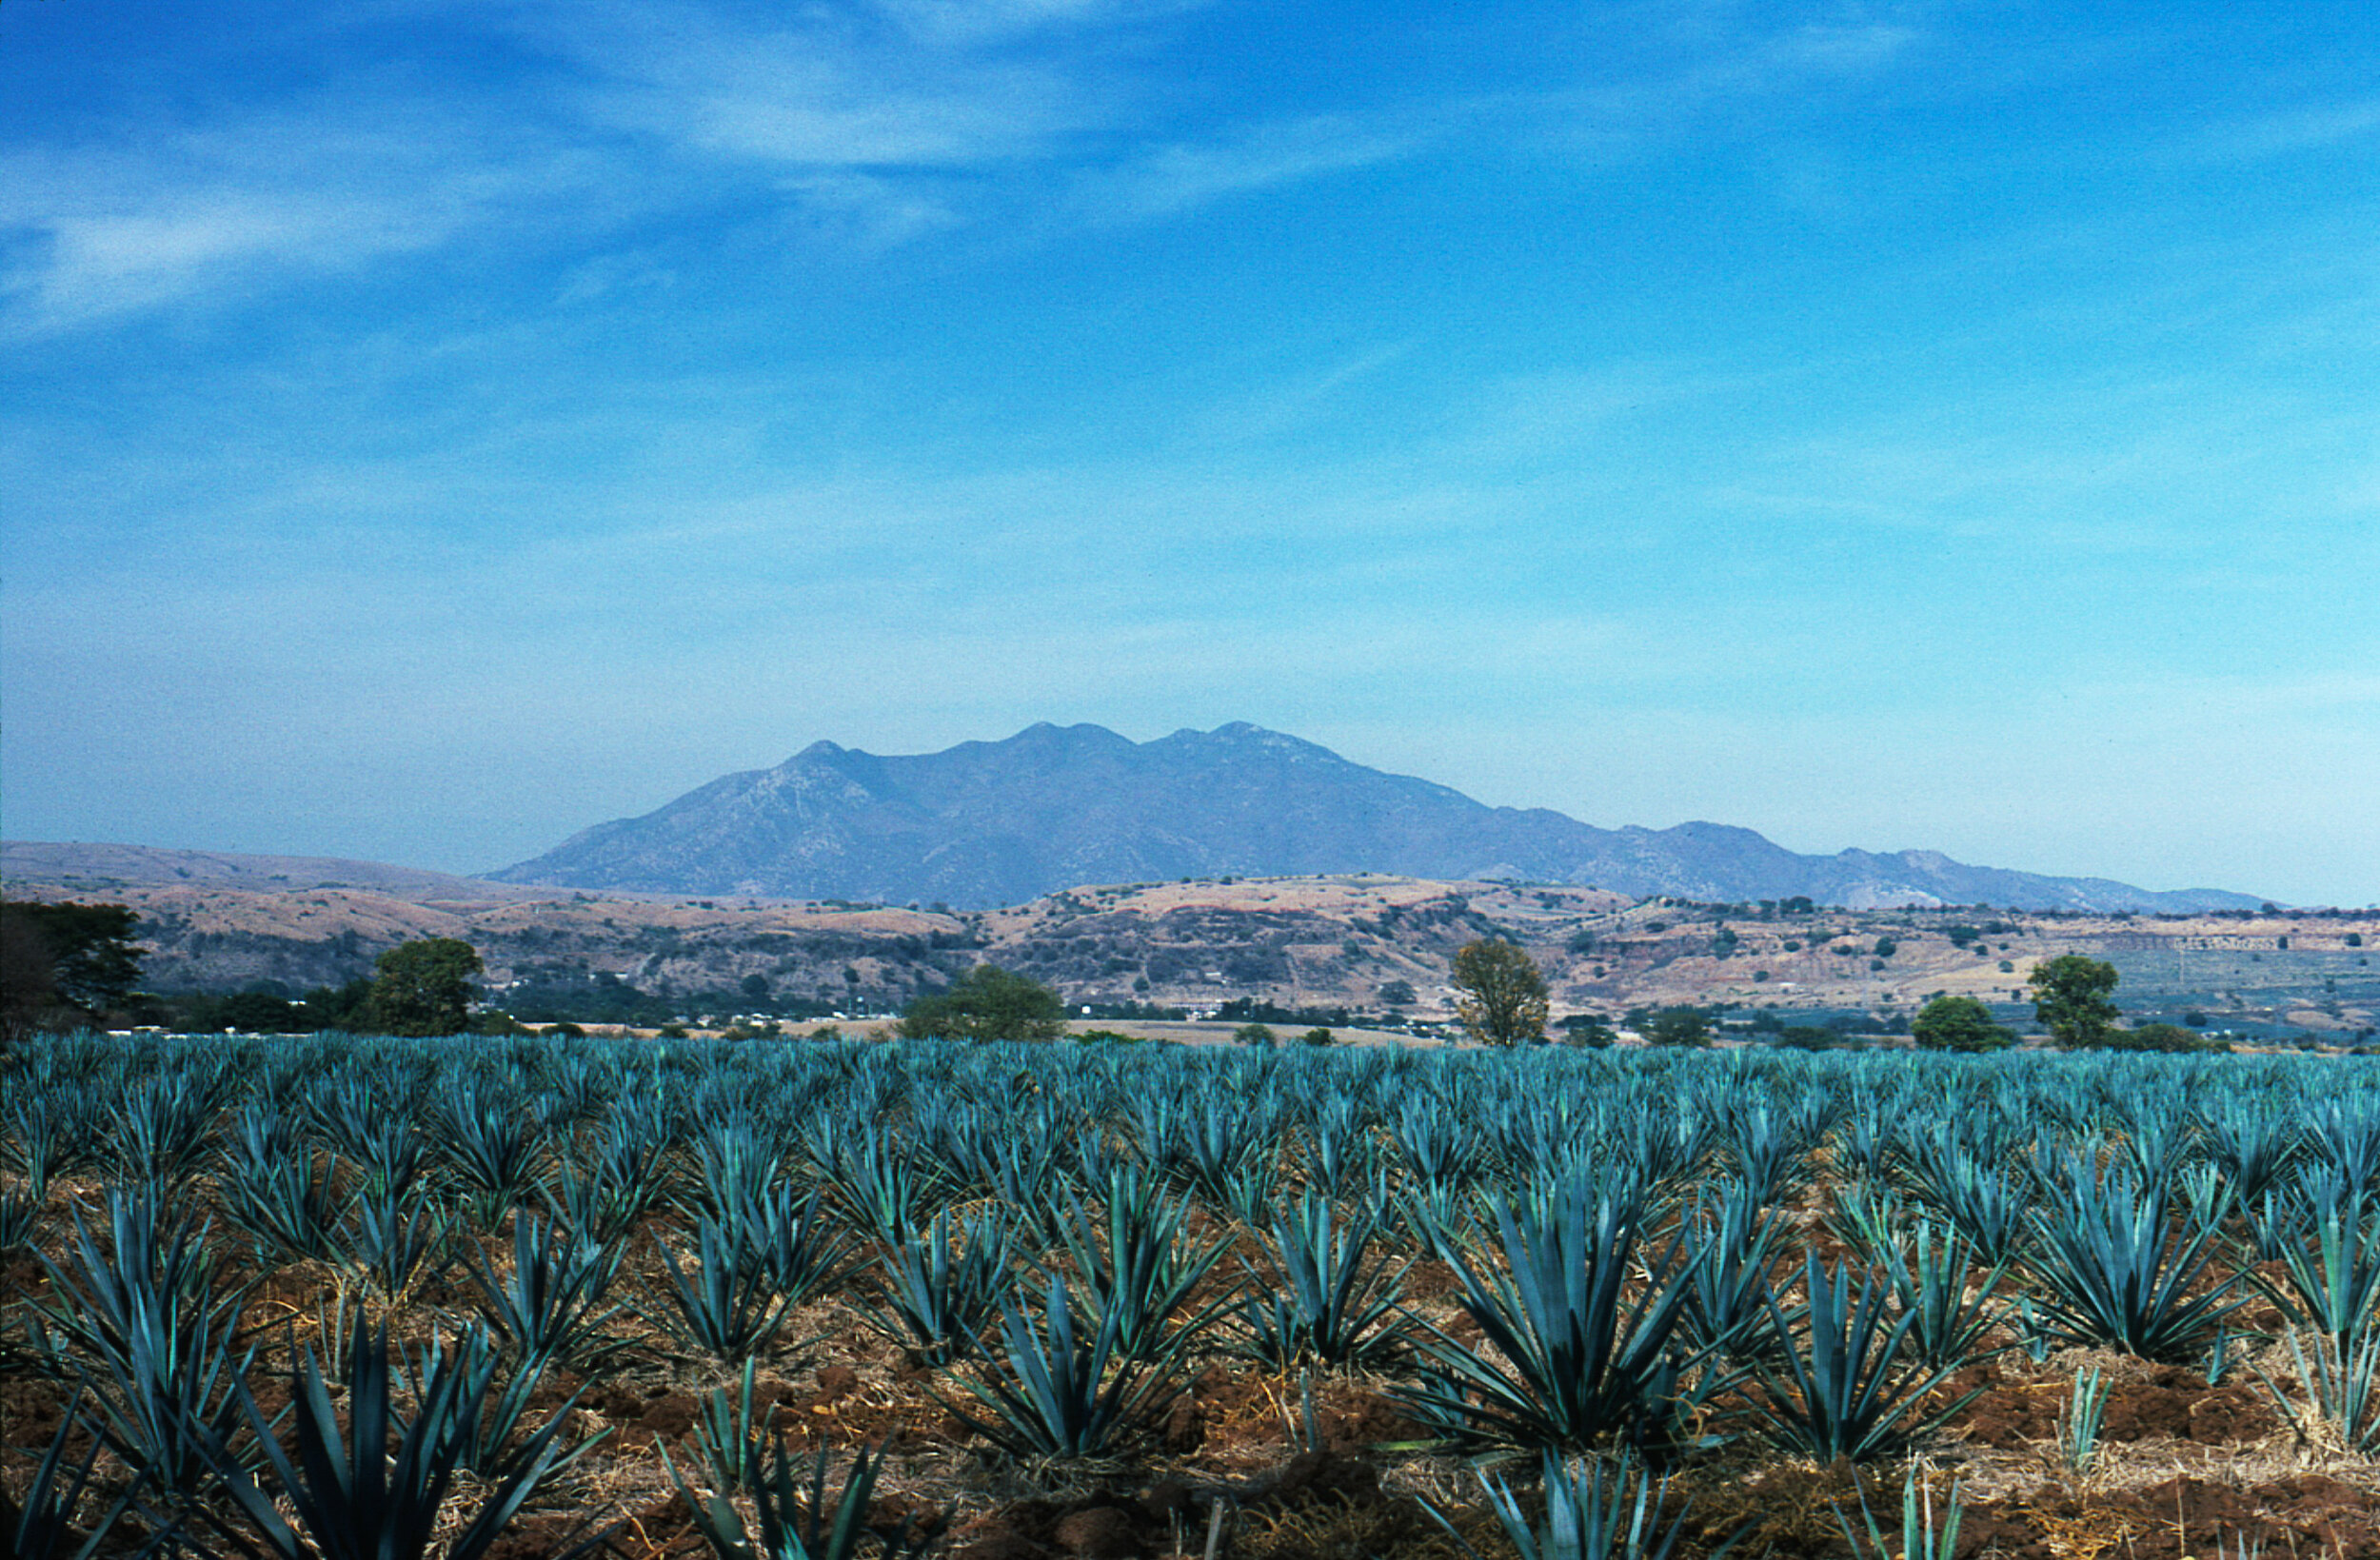 Agave Field Tequila, Mexico 1989